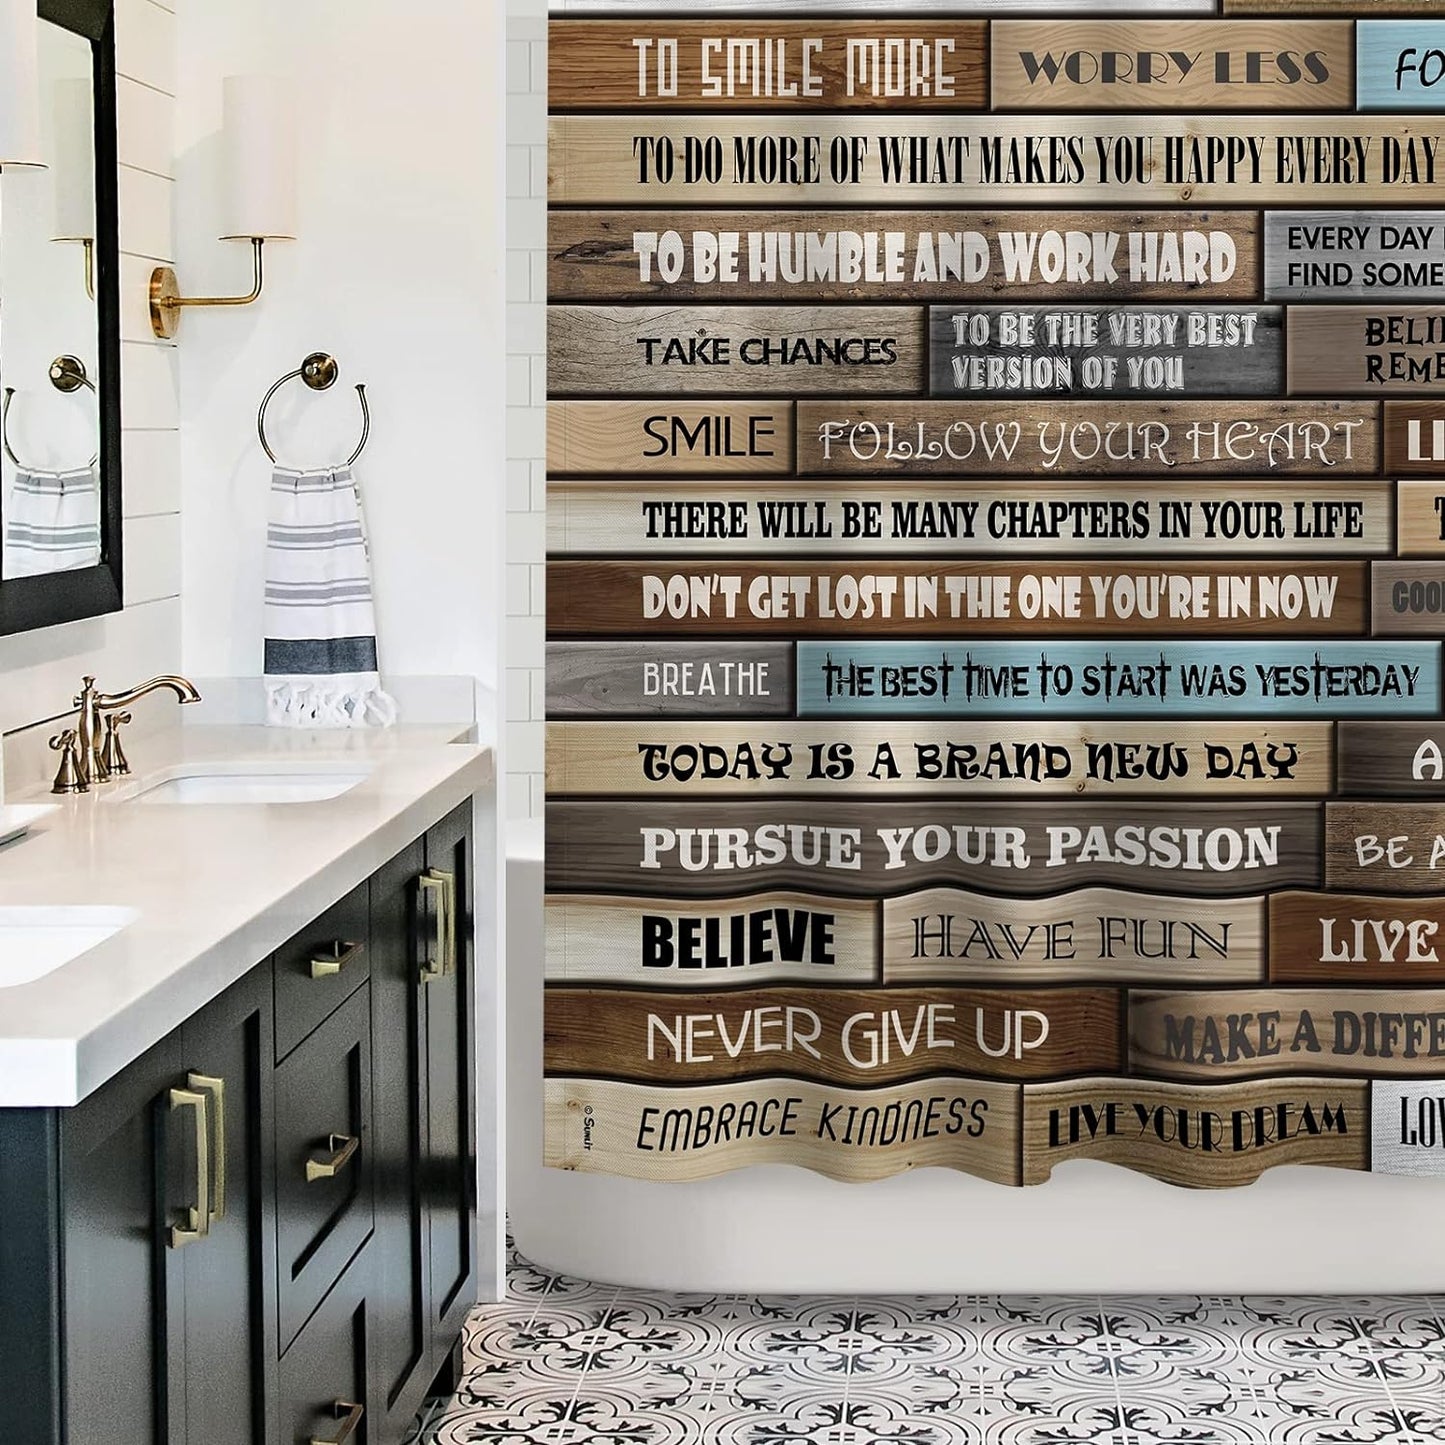 Sunlit Extra Long Inspirational Motivational Happiness Quotes for Courage Be Awesome Poster Print Rustic Cabin Shower Curtain Teak Closet Curtain Home Bathroom Decor Fabric Quote Tapestry